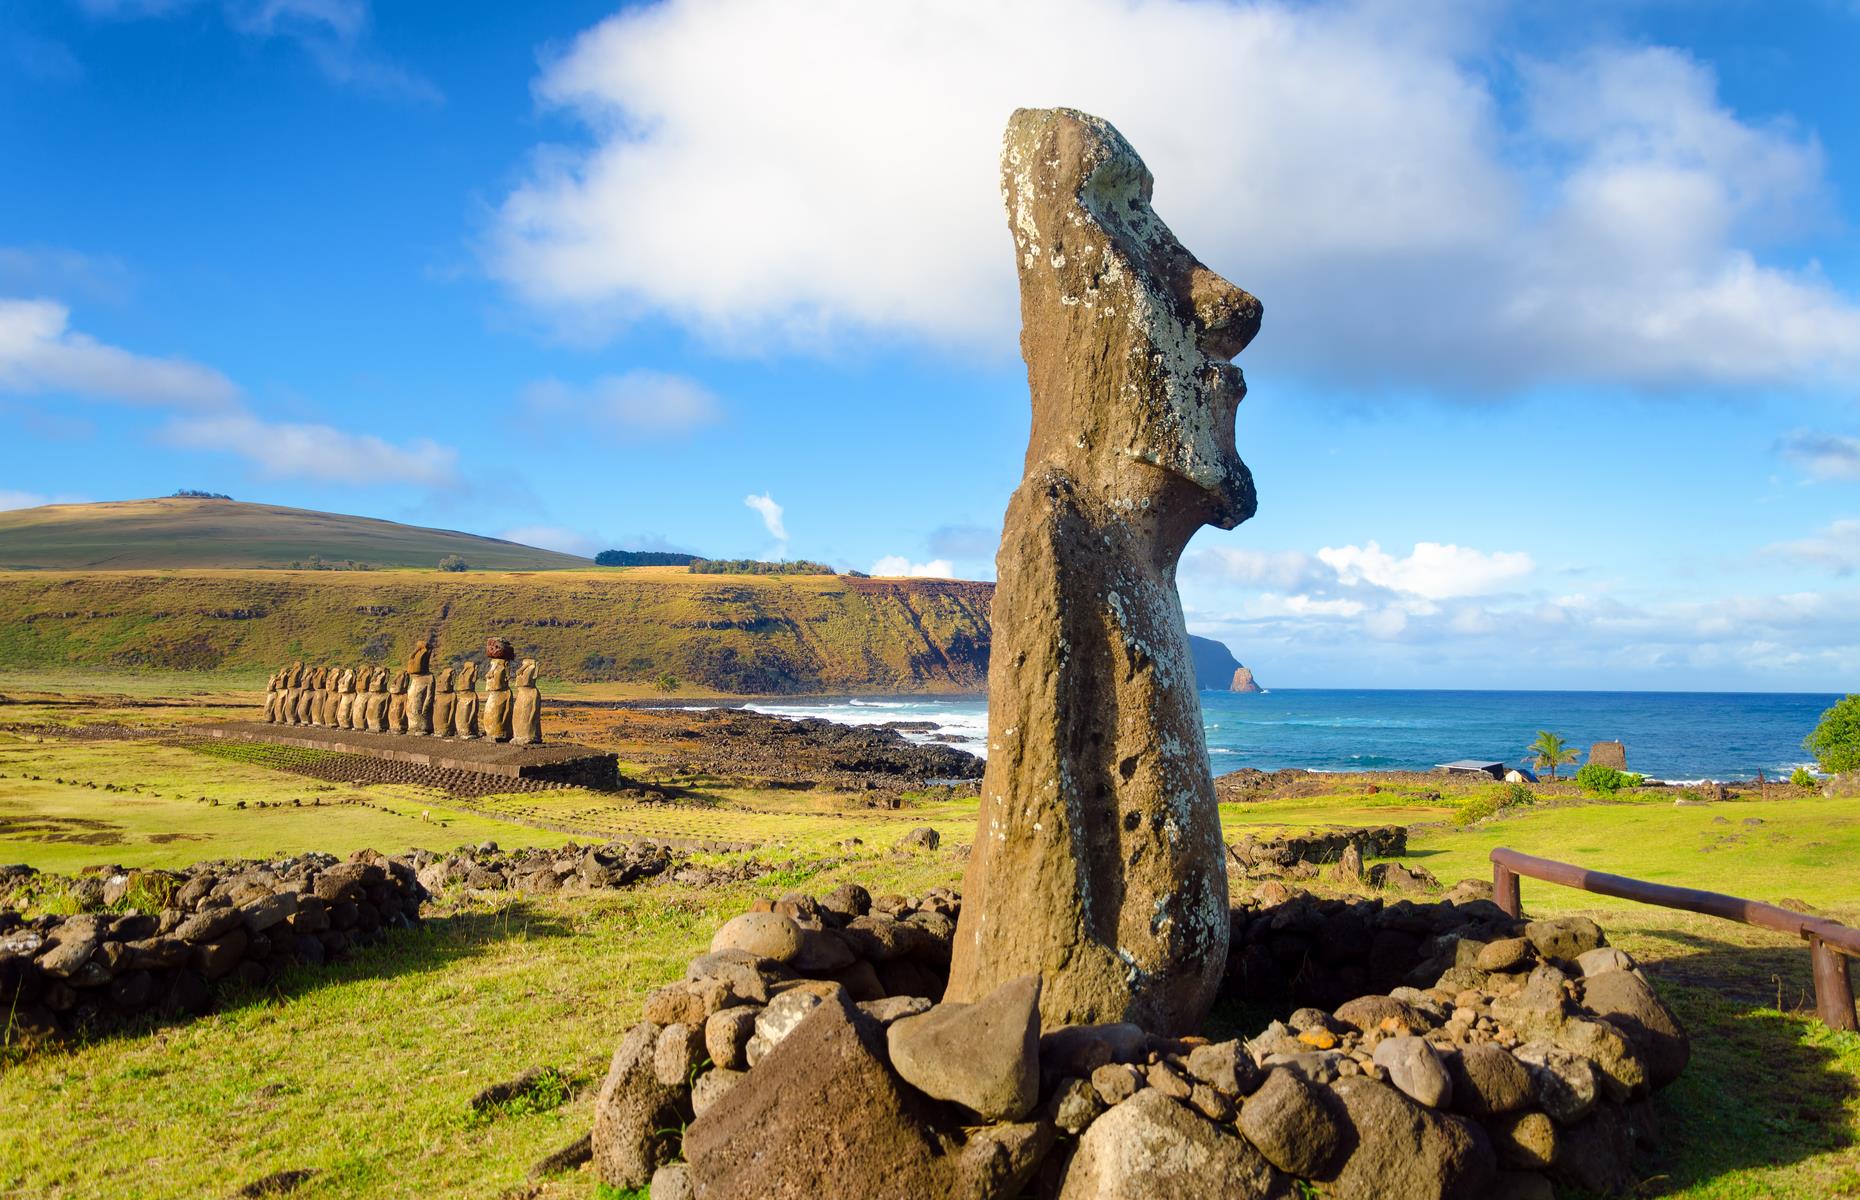 <p>Another of the world's most enigmatic and intriguing civilizations is the Rapa Nui, who settled on a far-flung Pacific island after arriving from Polynesia around AD 300. The island took their name, although it's now known as Easter Island, yet how they voyaged to this remote part of the world is a mystery. As is exactly how they carved and transported the 900-plus massive statues, known as Moai, around the island. </p>